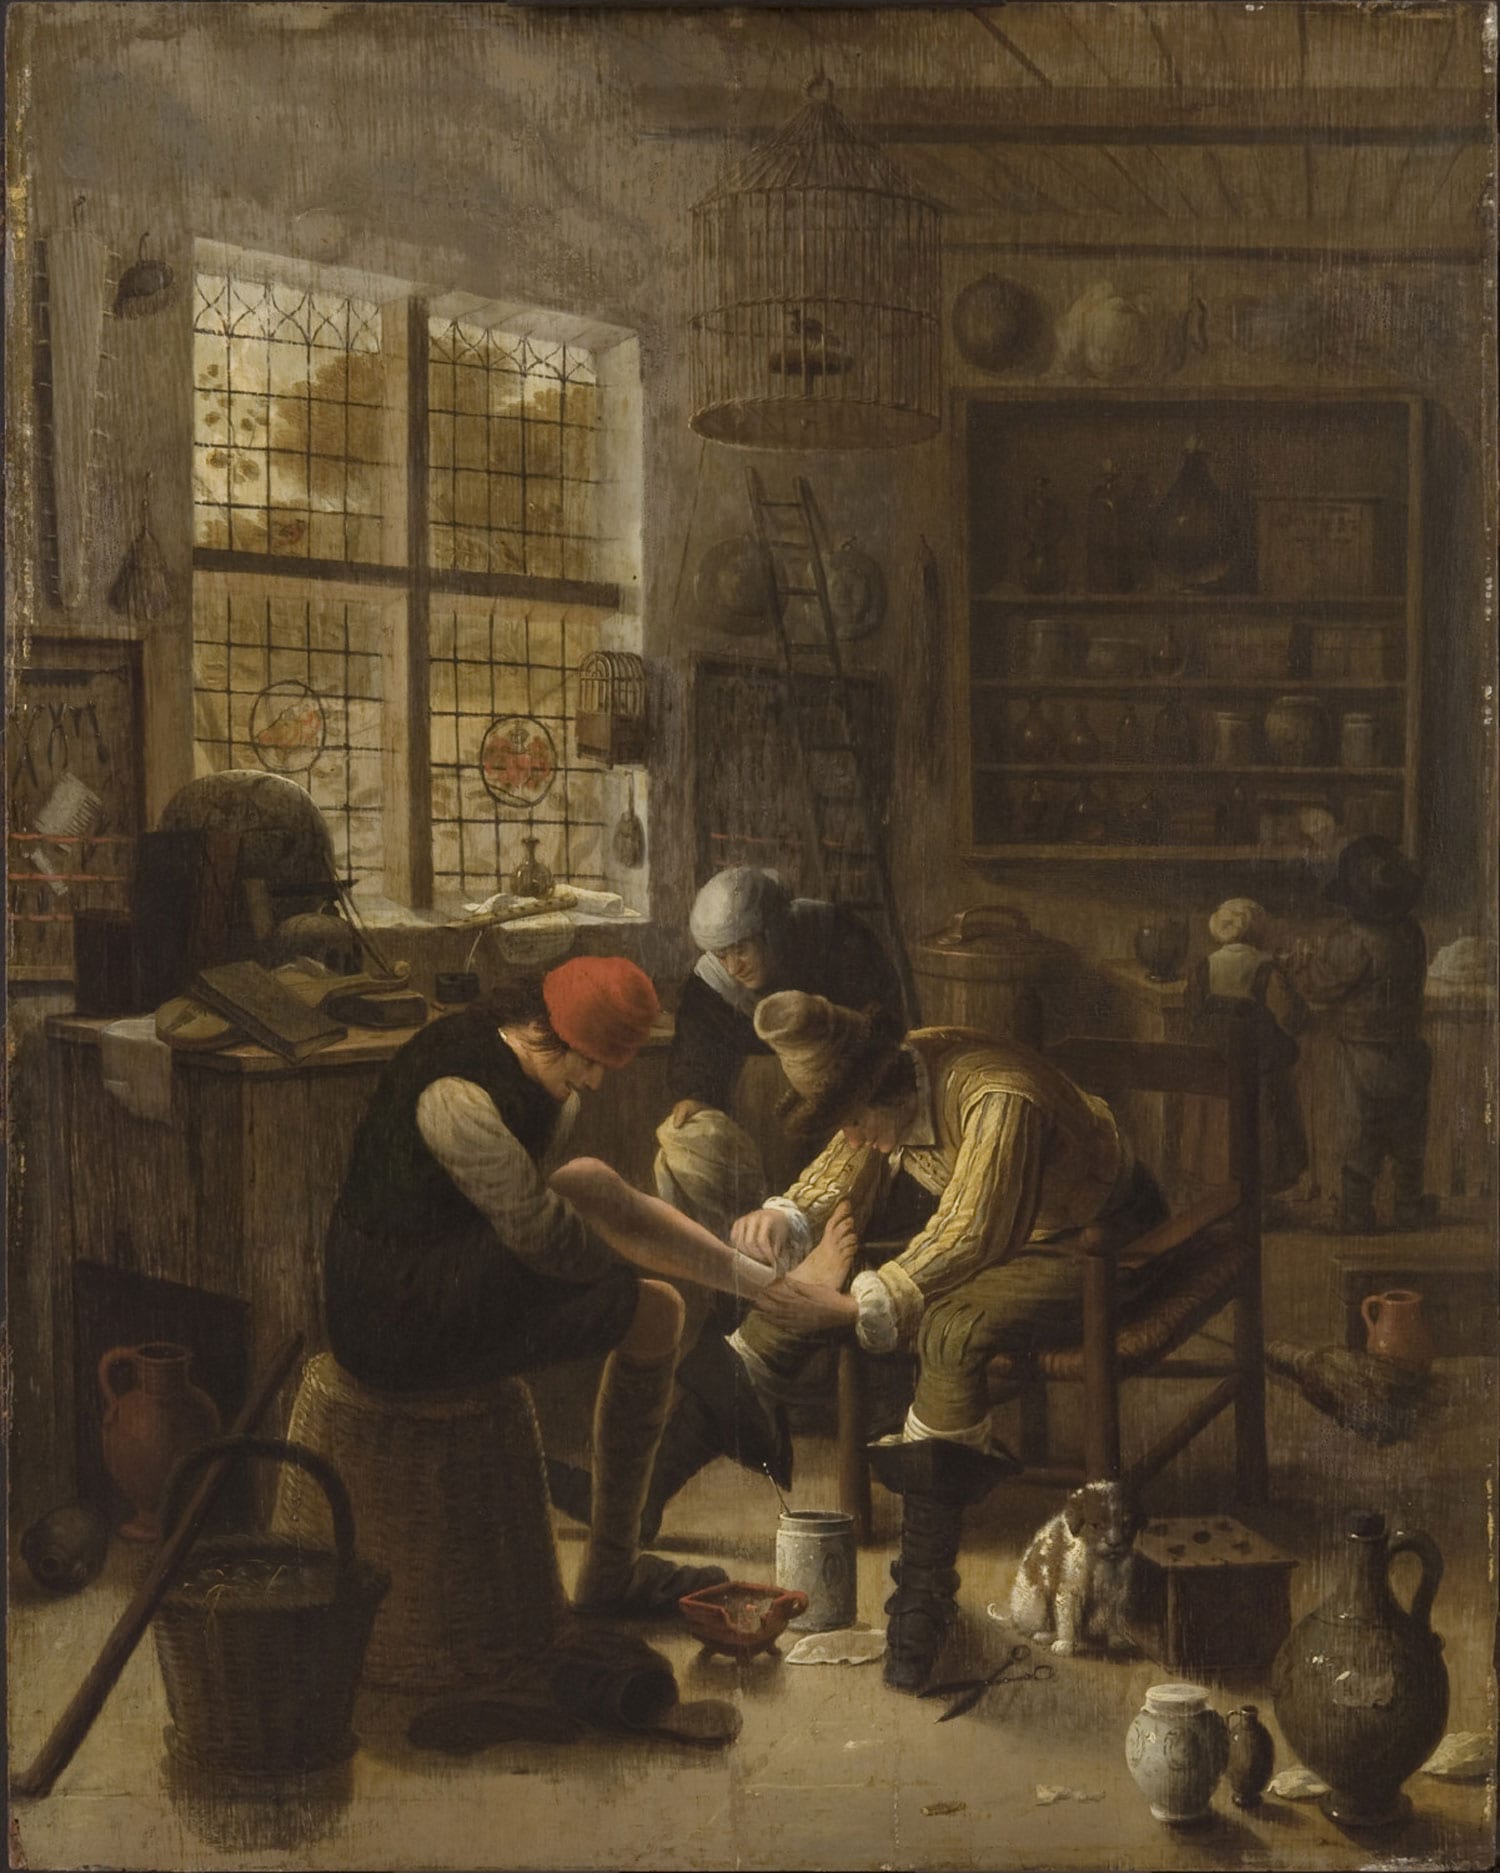 Painting of a village surgeon's office